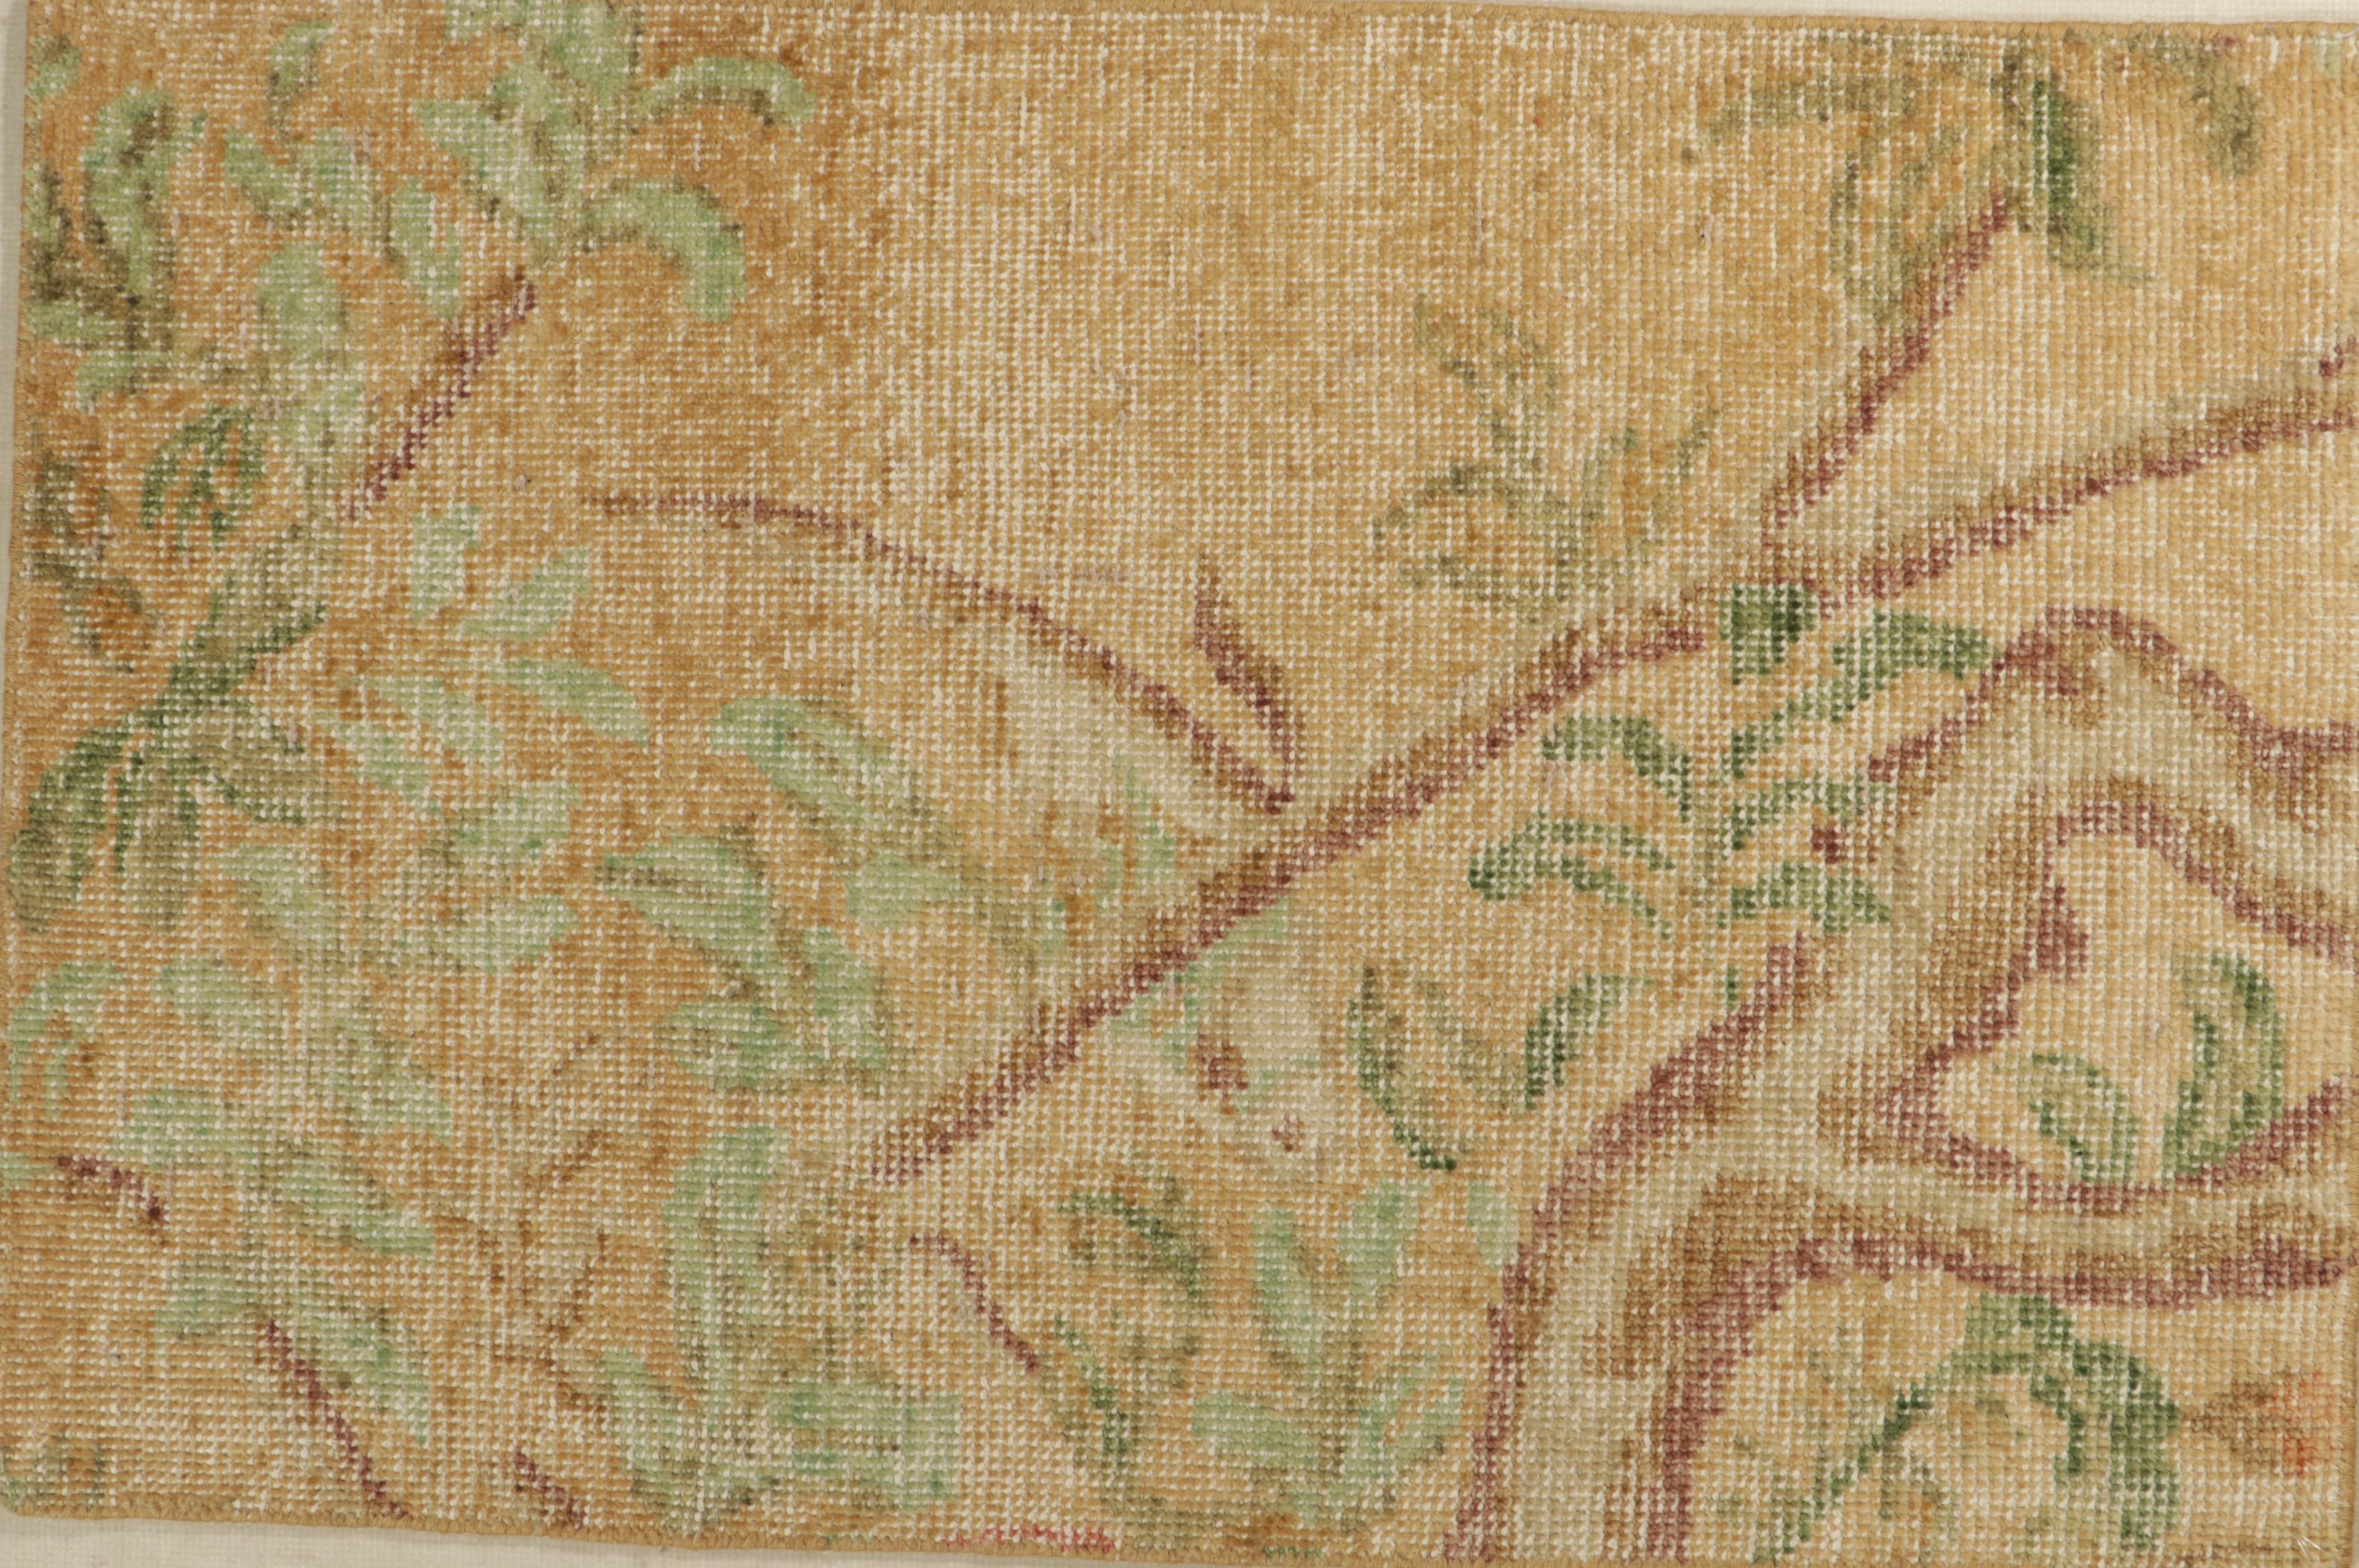 Modern Rug & Kilim’s Distressed Style Gift-Size Rug in Beige-Brown and Green Florals For Sale